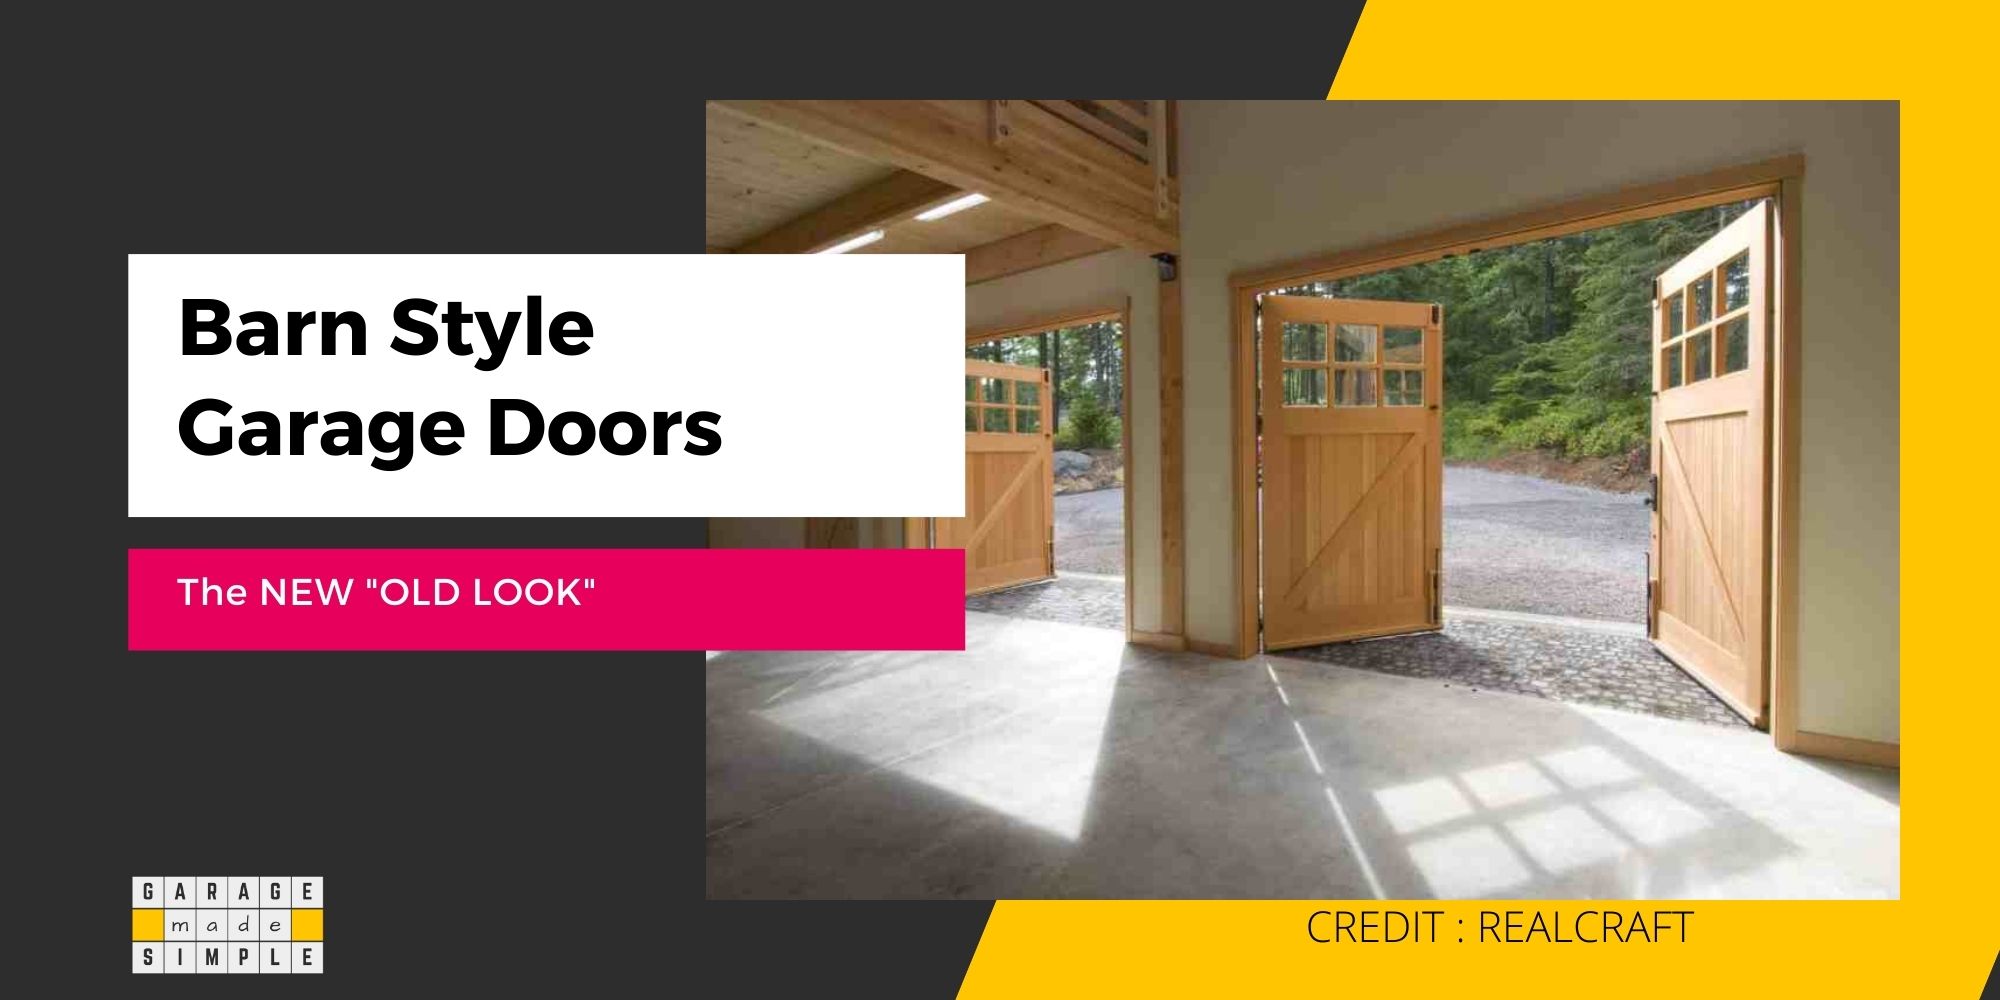 Are Barn Style Garage Doors The New “Old Look”?